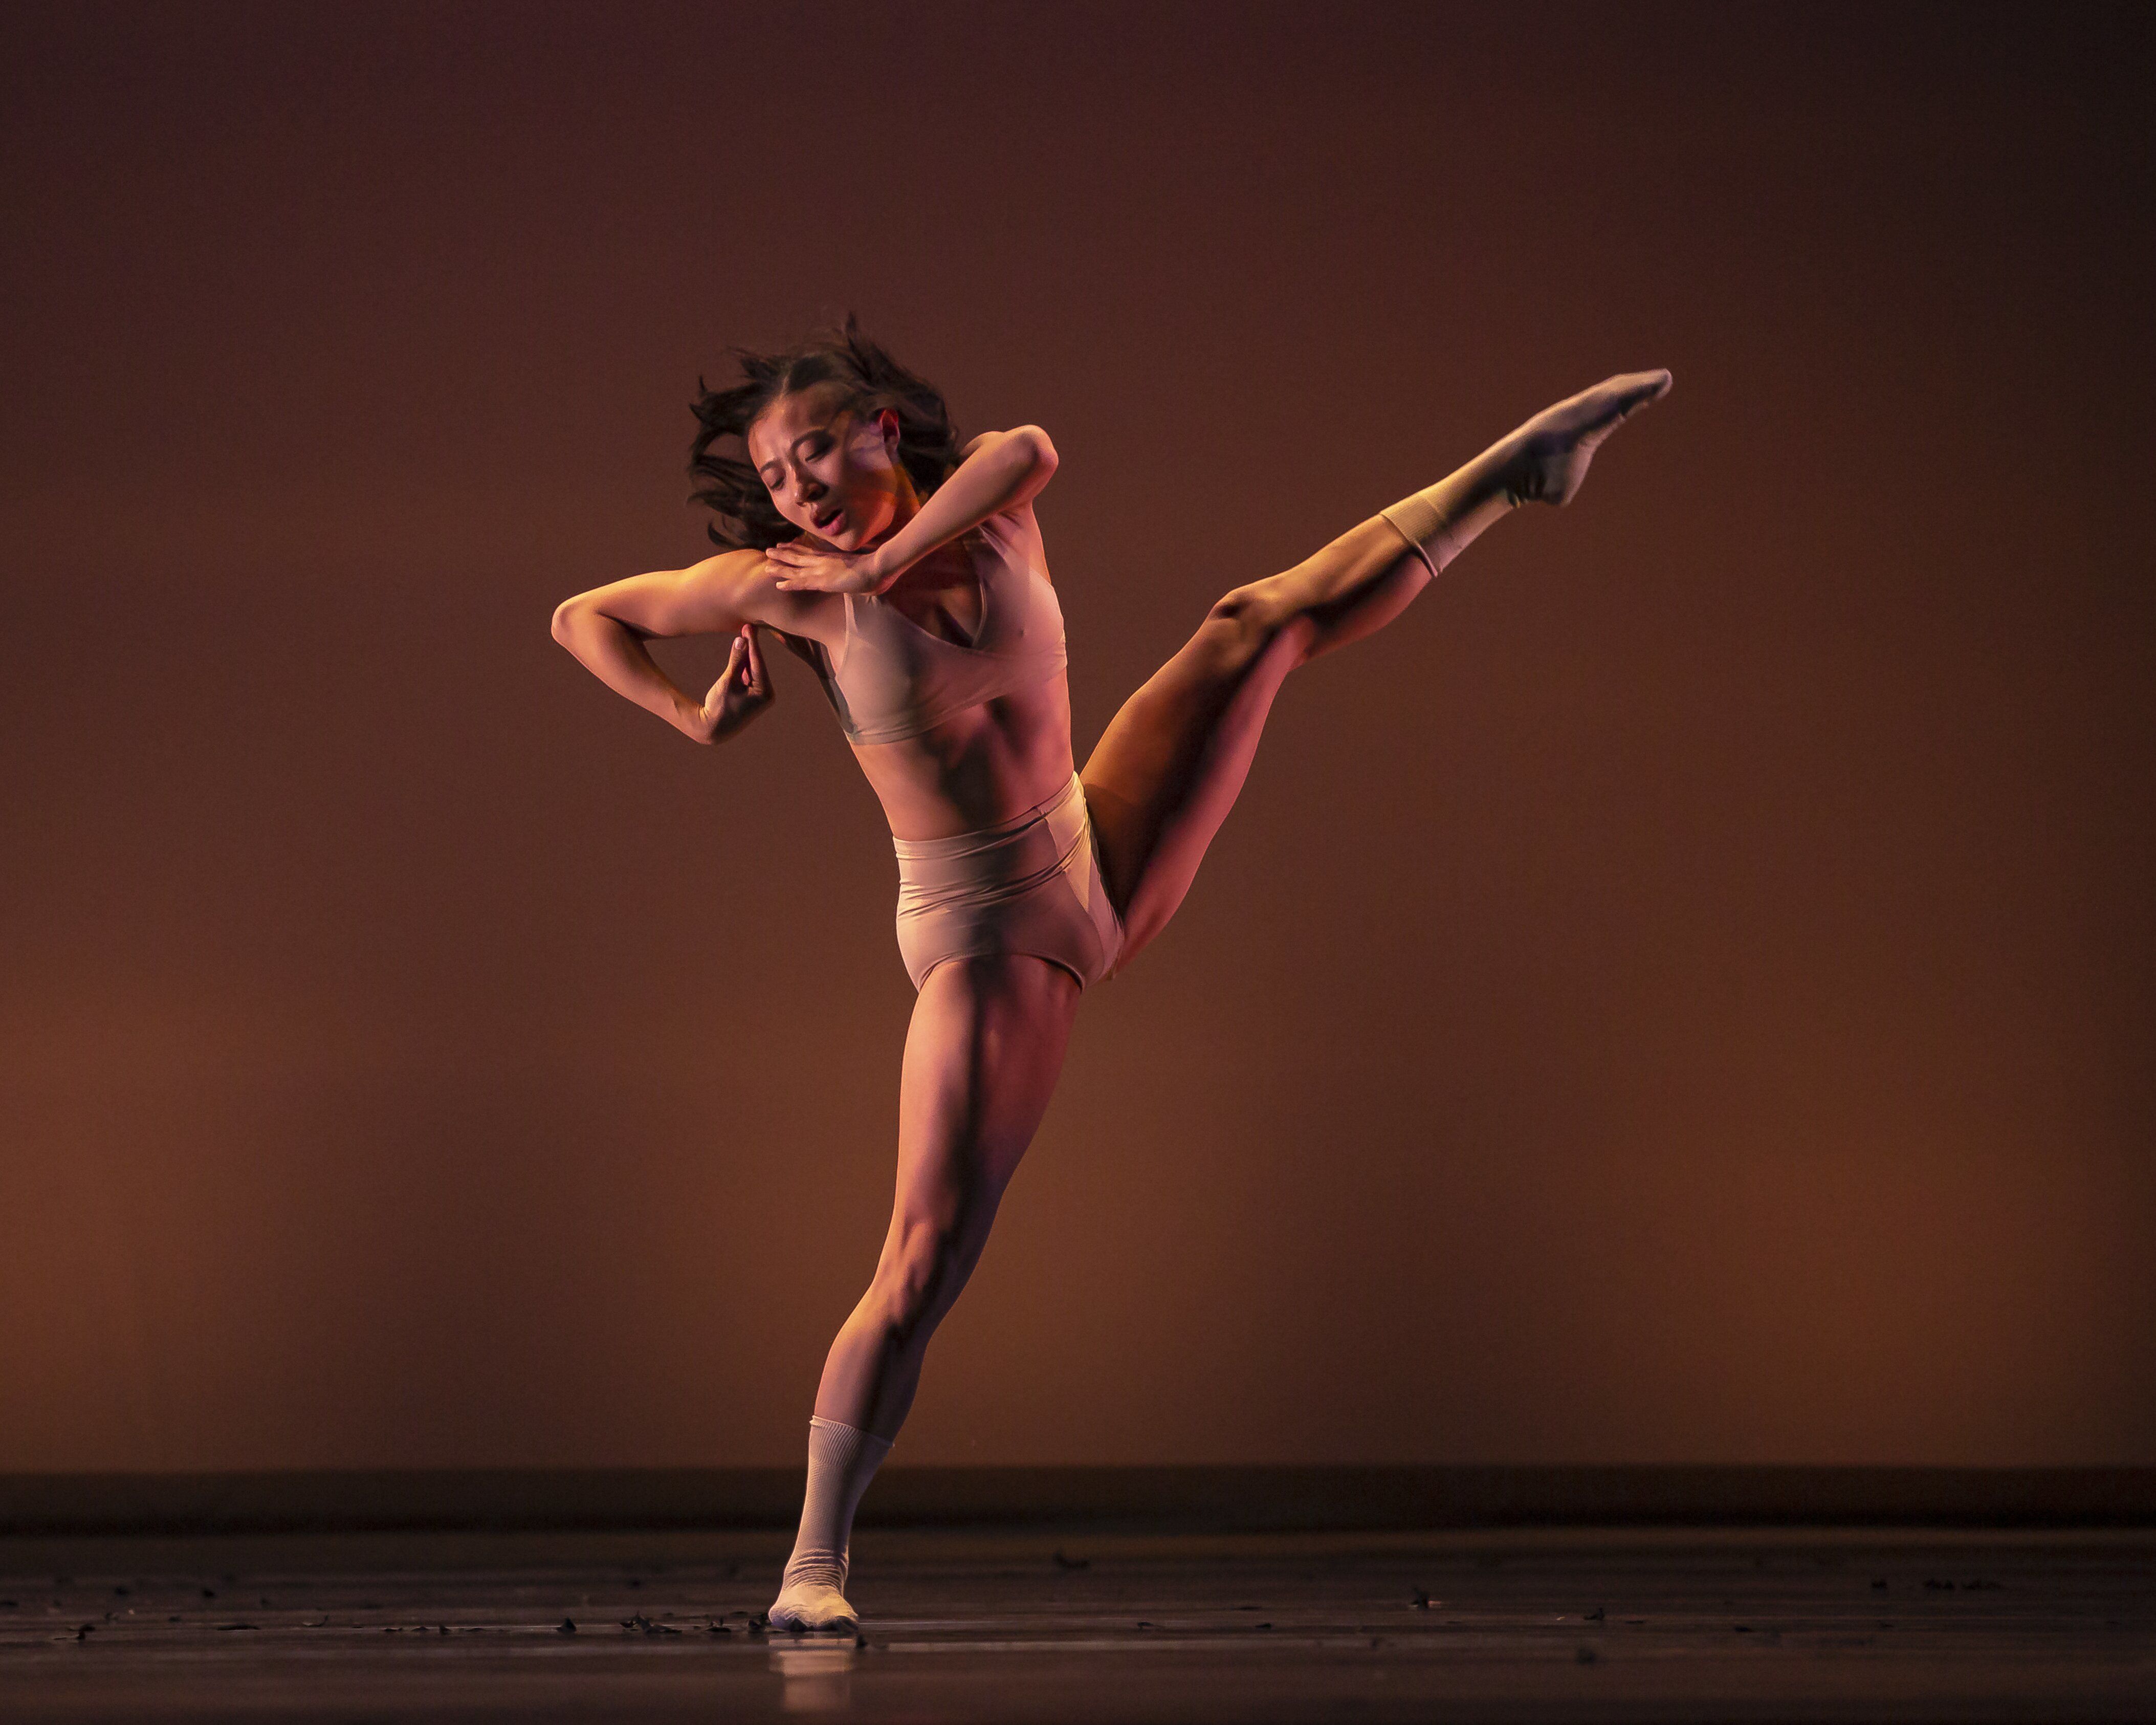 dancer with leg extended